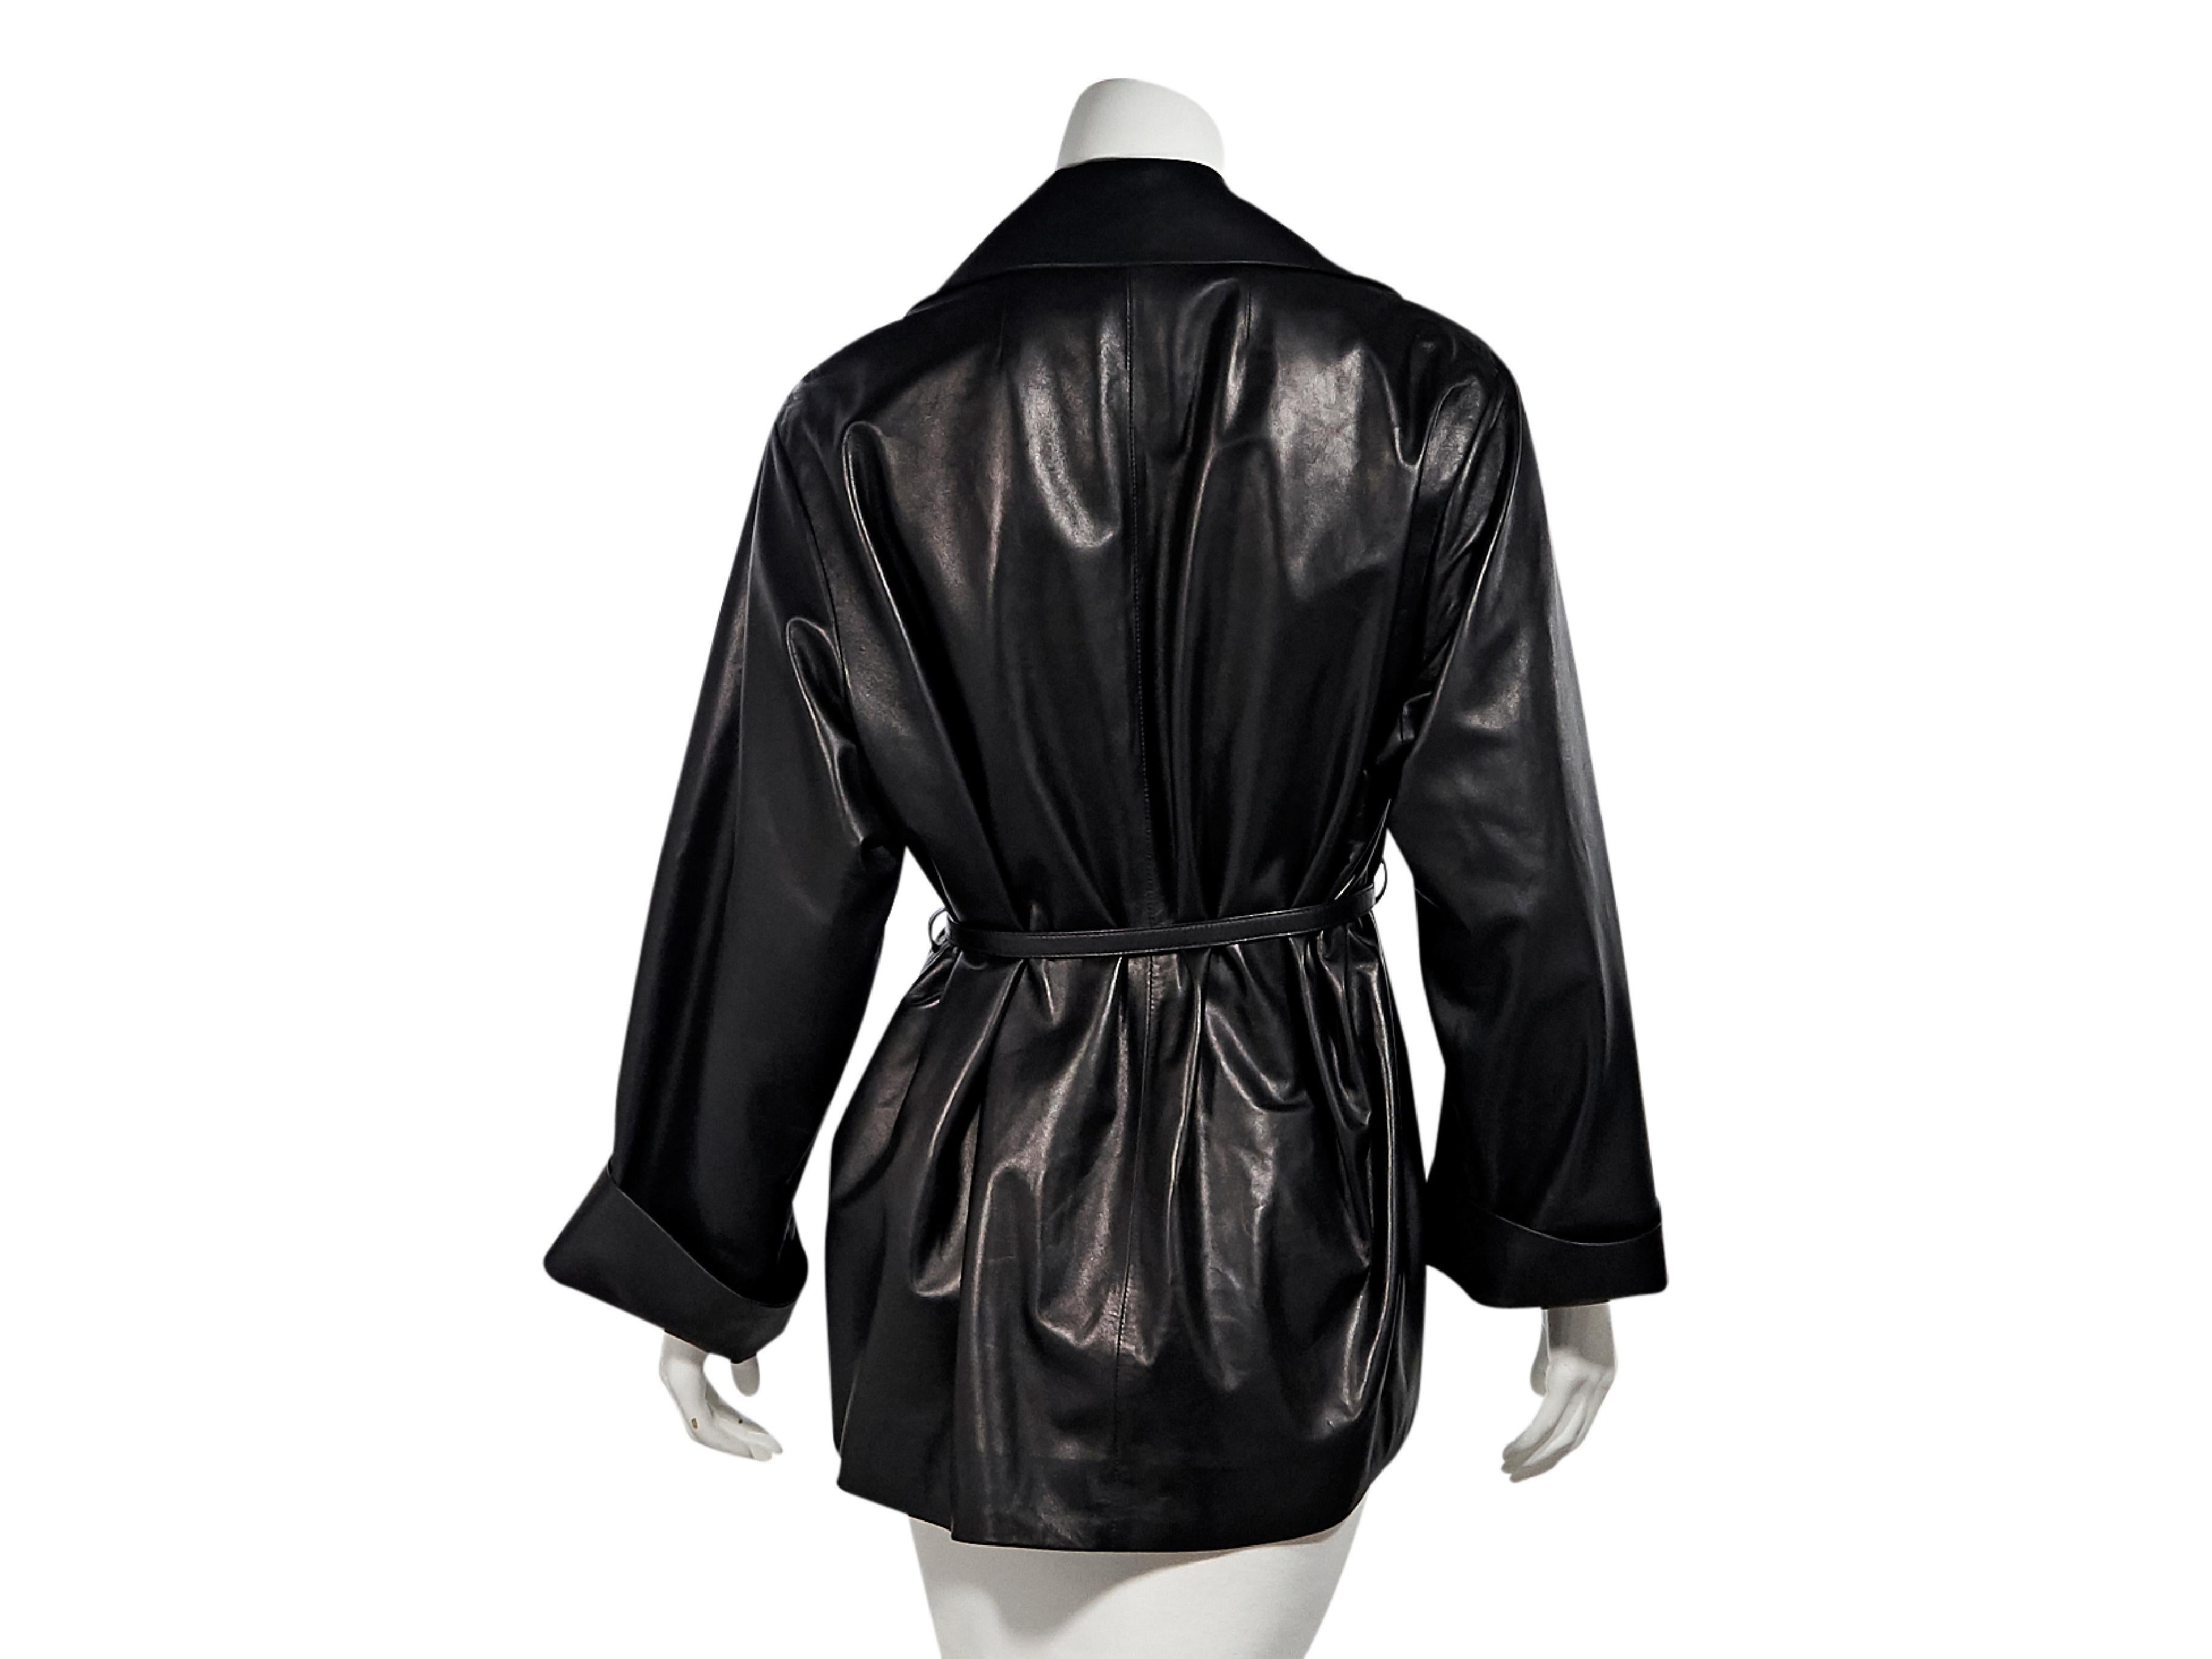 Product details:  Black lambskin leather jacket by The Row.  Peaked lapel.  Long sleeves.  Turn-back cuffs.  Self-tie belted waist.  40